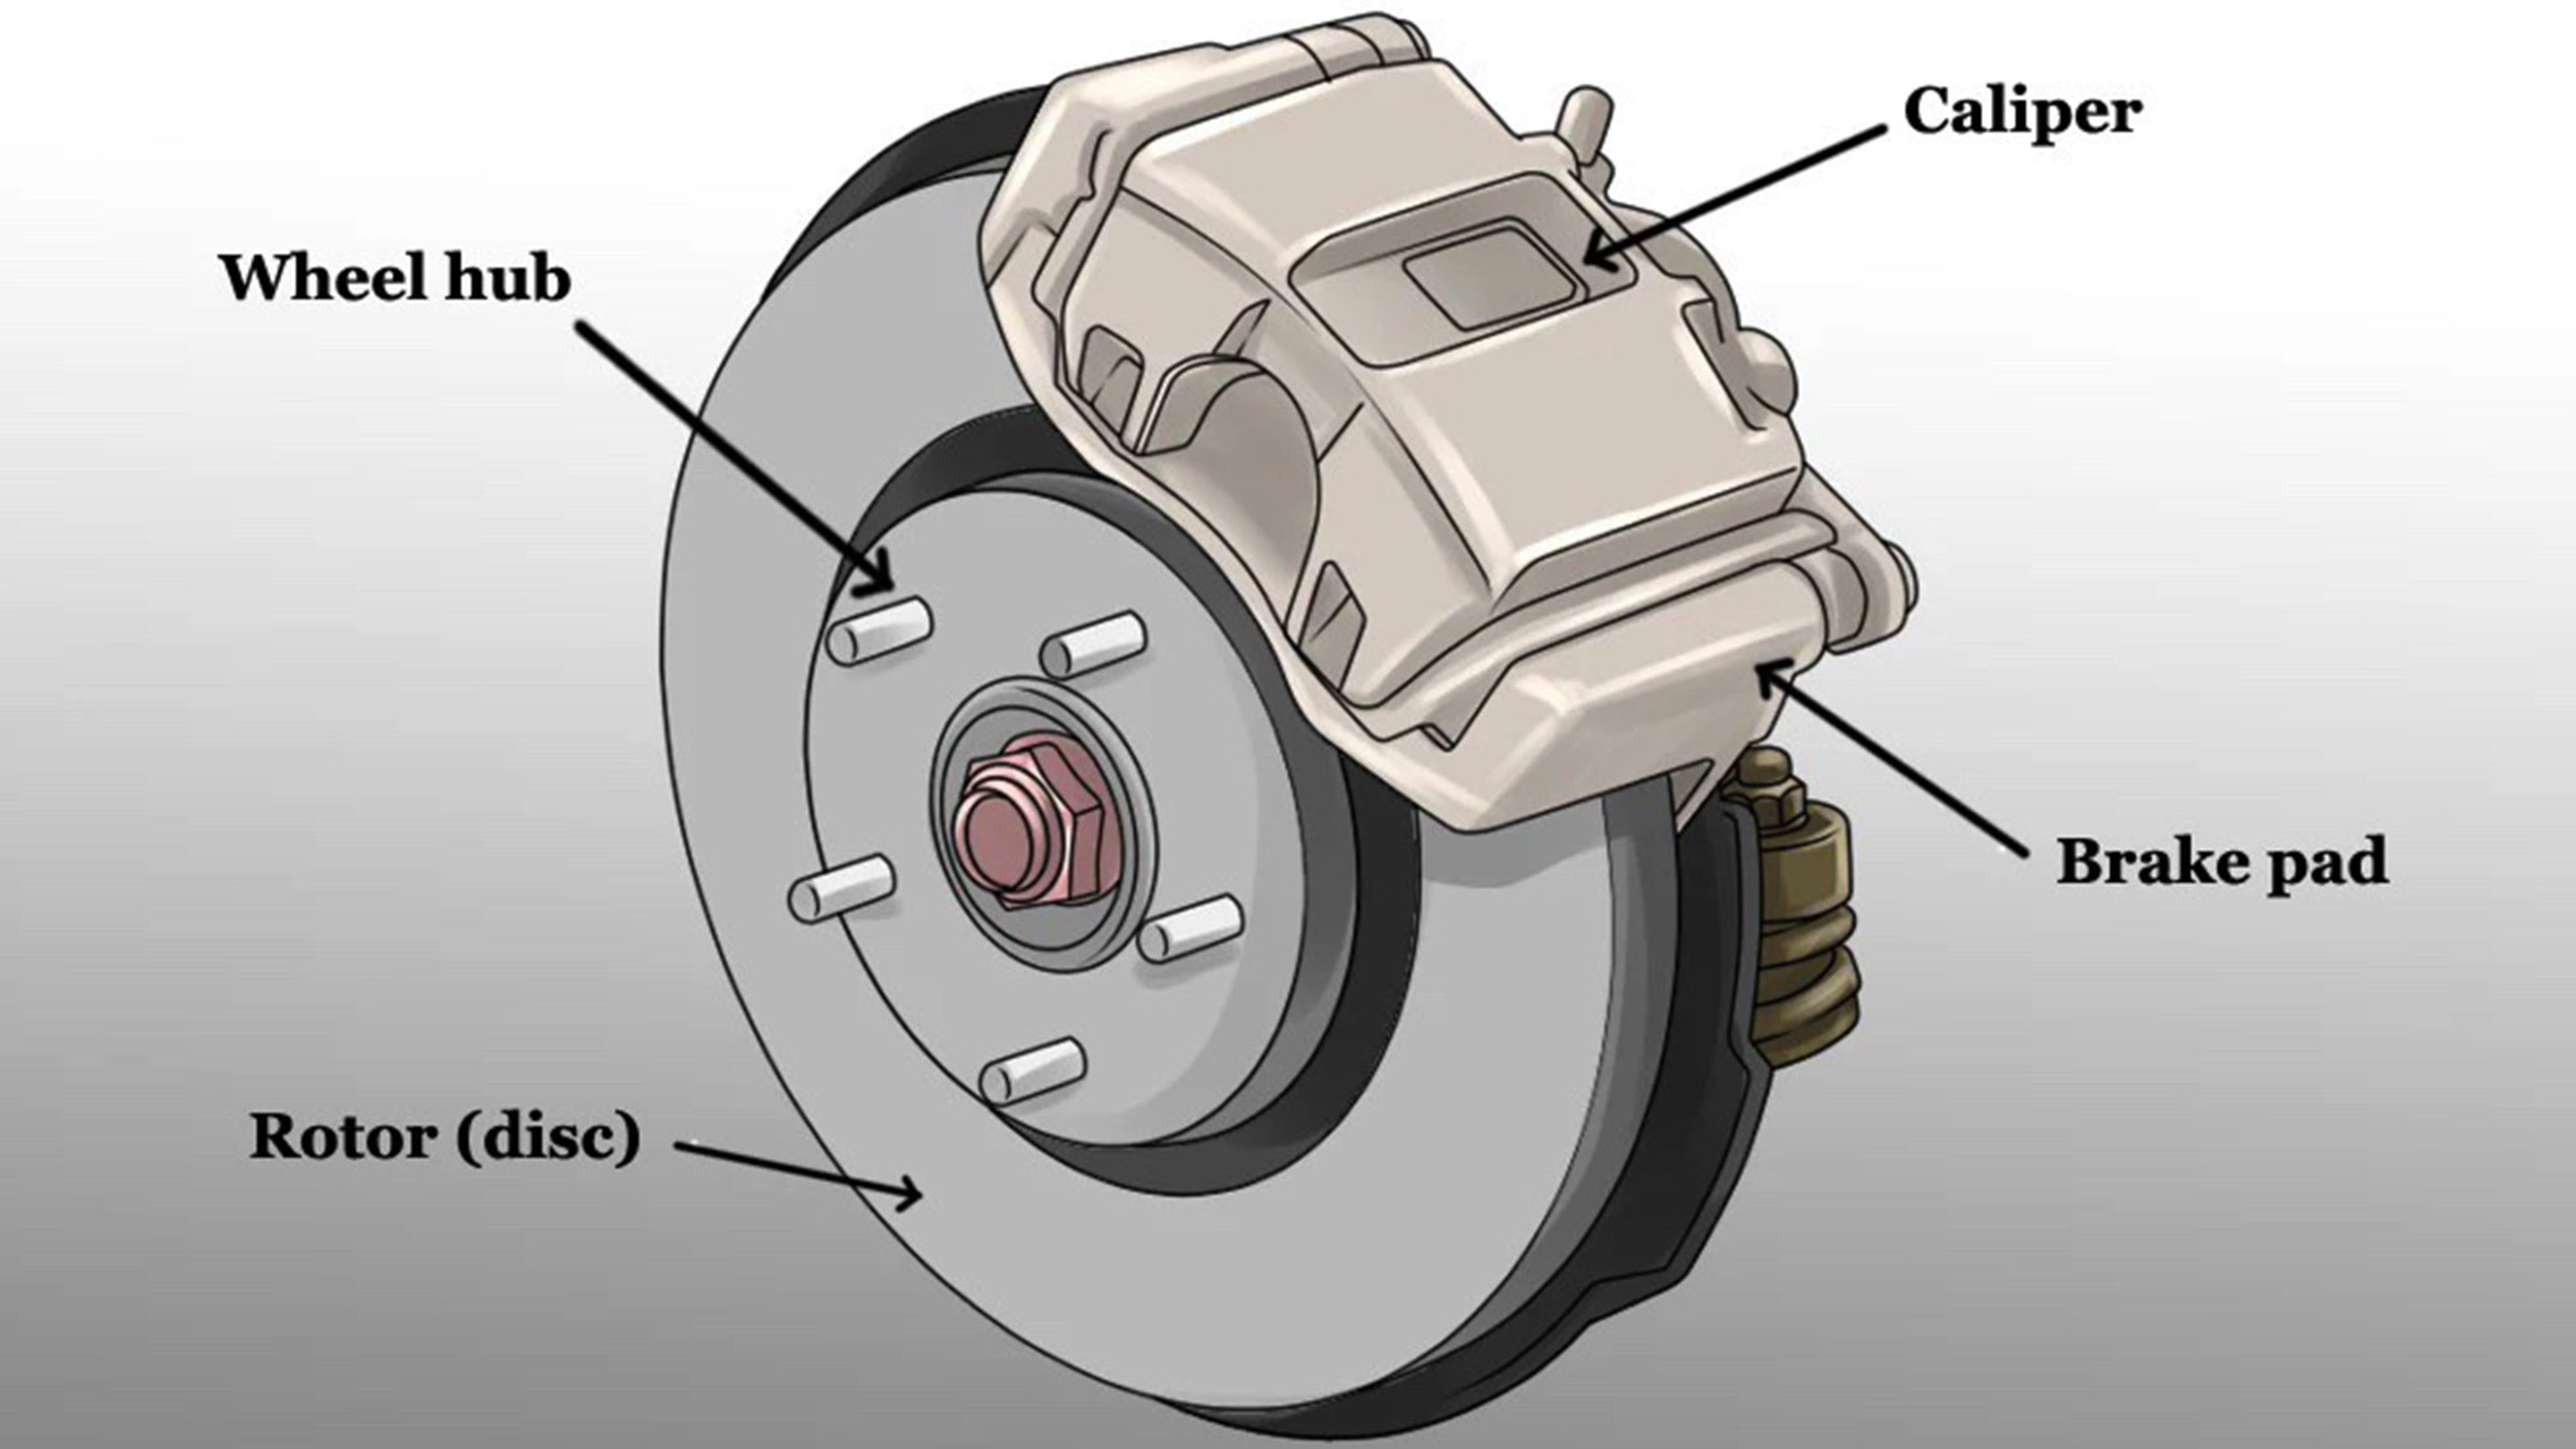 Digram of brake rotor attached to wheel hub with pad and caliper